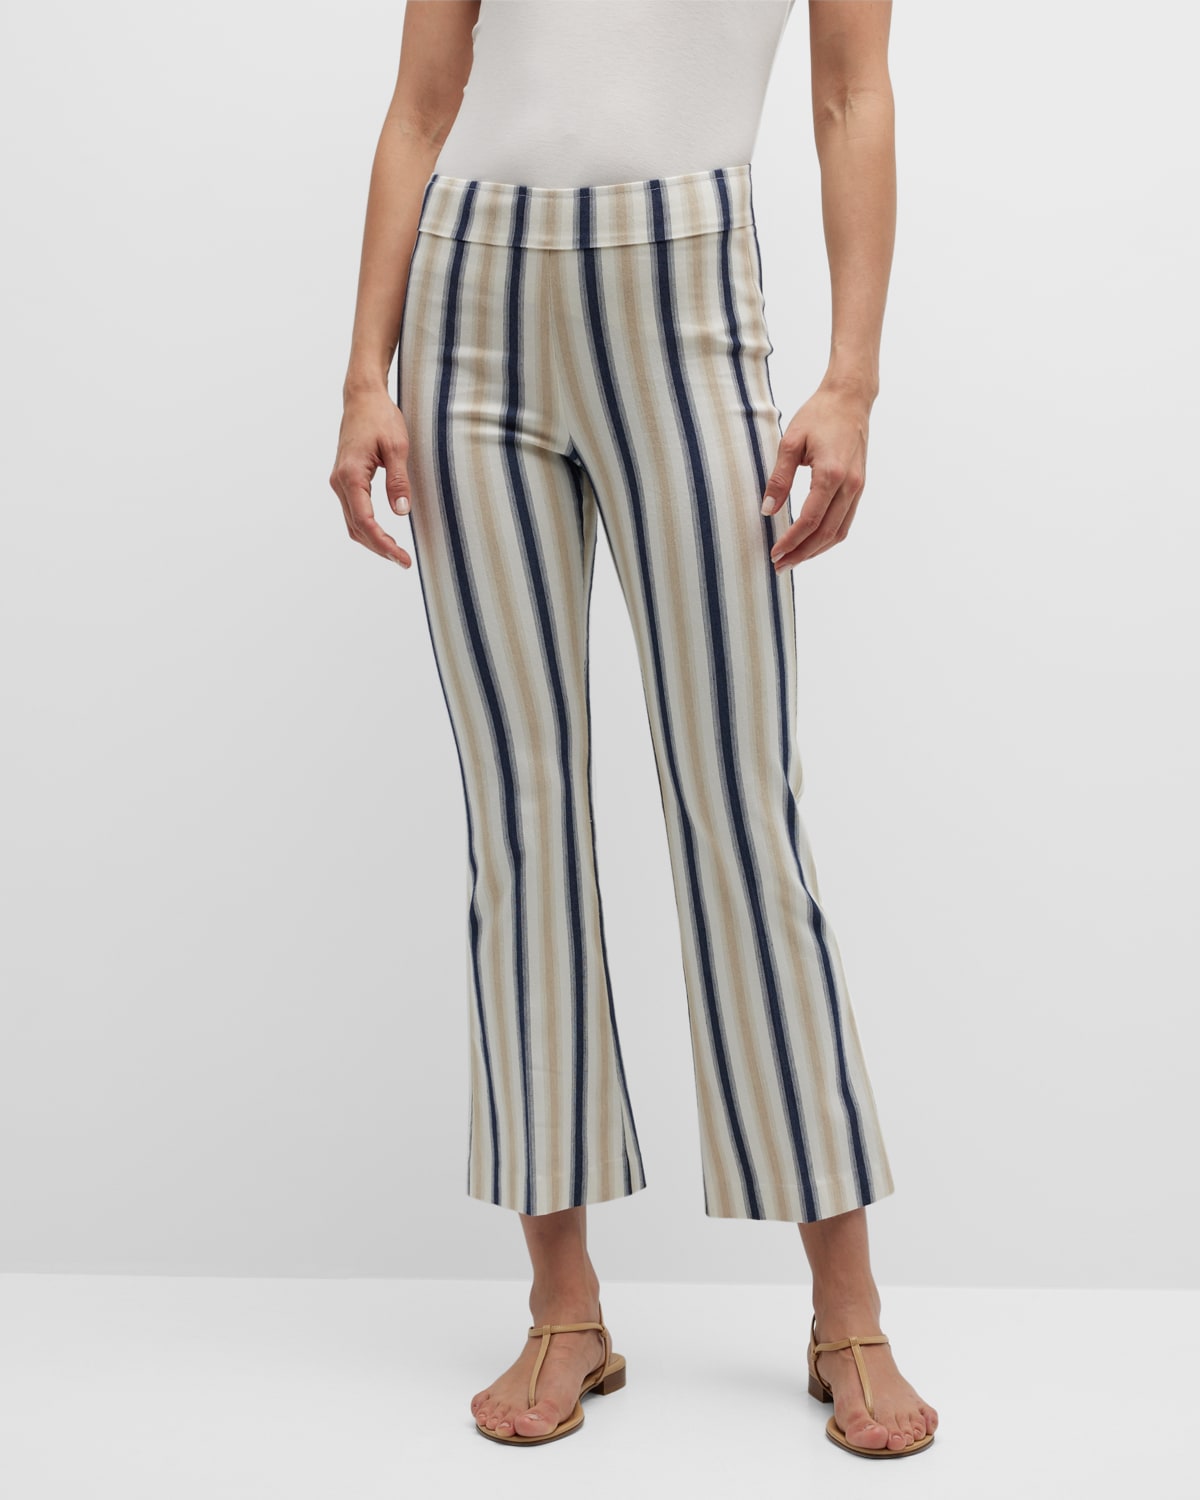 Avenue Montaigne Striped Cropped Flare Pants